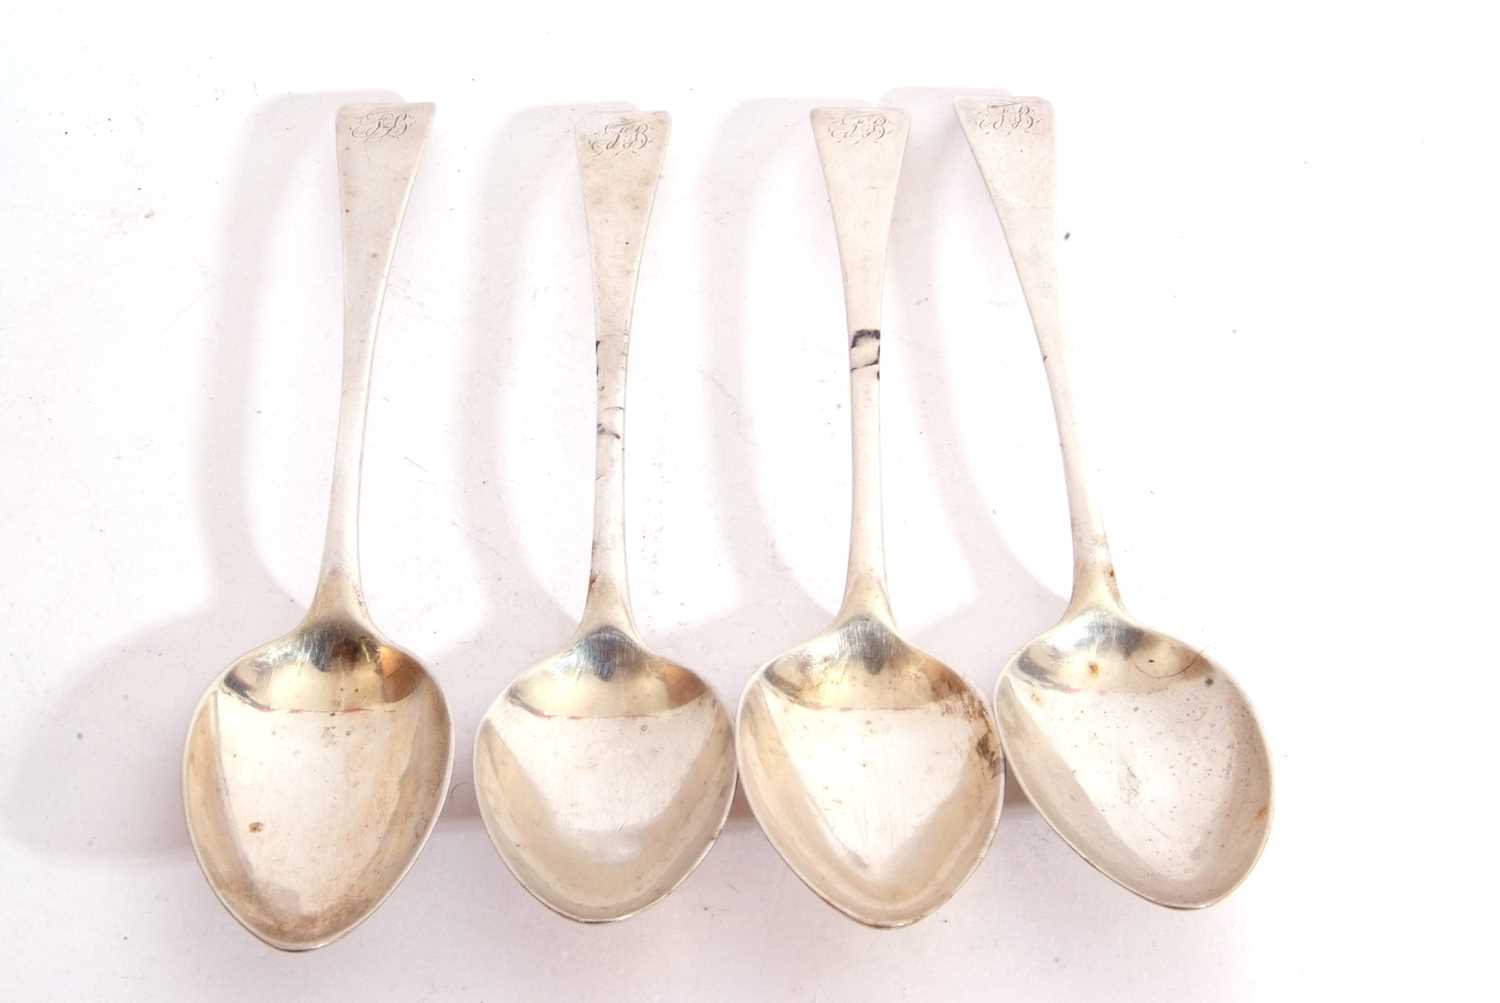 Set of four Georgian Old English table spoons engraved with family monogram, London 1802, maker's - Image 3 of 7